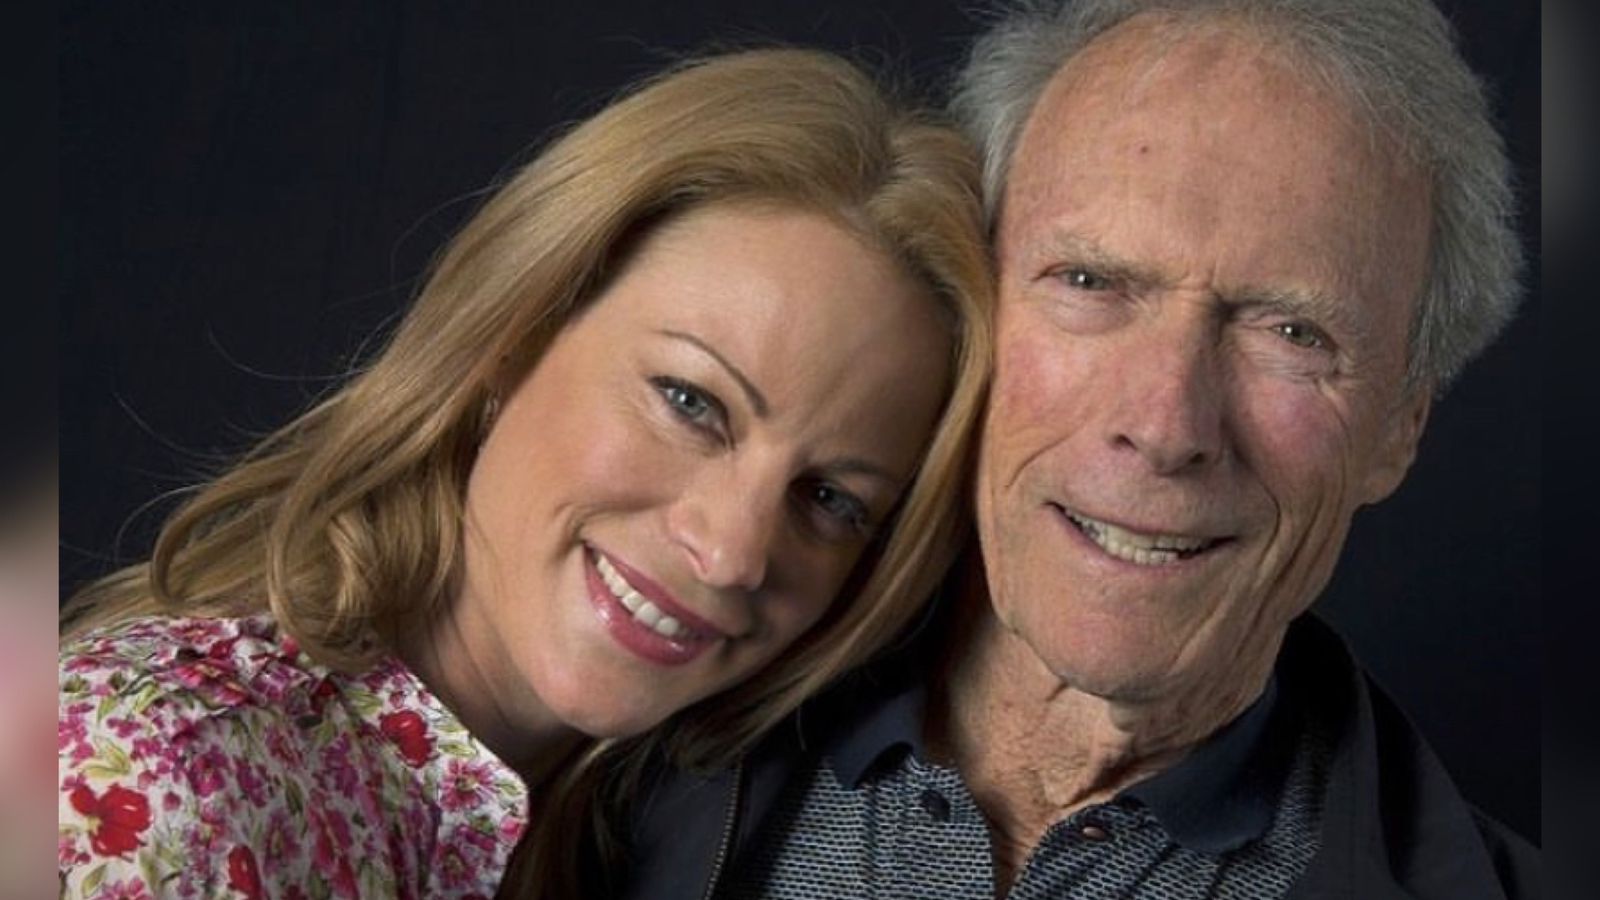 Clint Eastwood's Daughter Alison on Growing Up With Famous Dad: He's a 'Down-to-Earth' Person